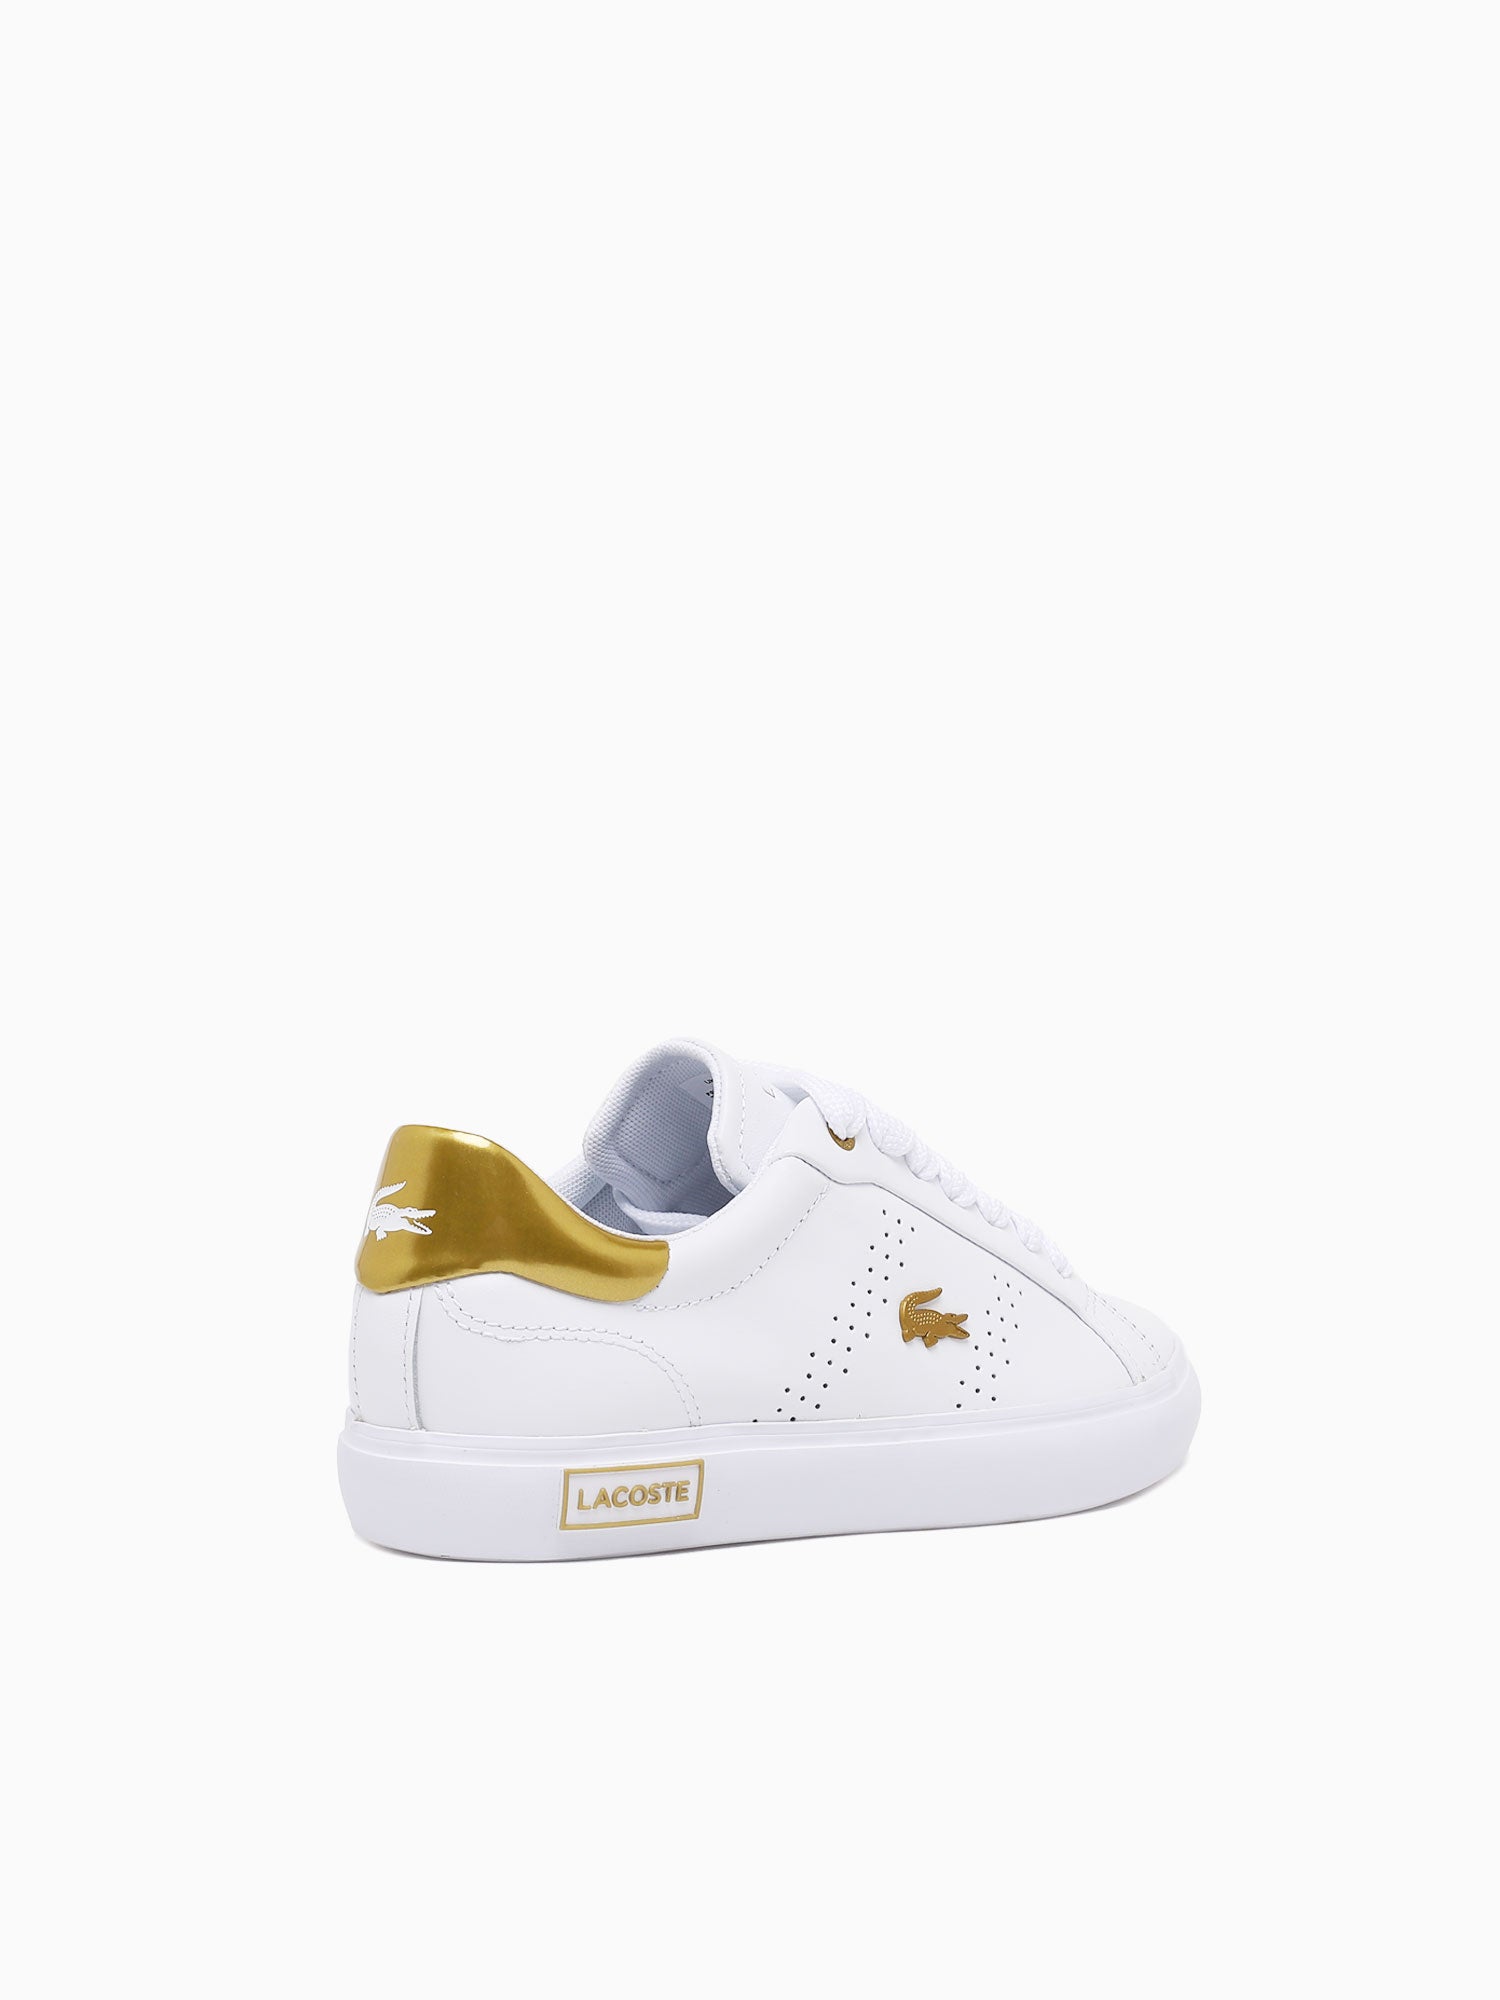 Powercourt 2.0 White Gold leather Gold / 5 / M